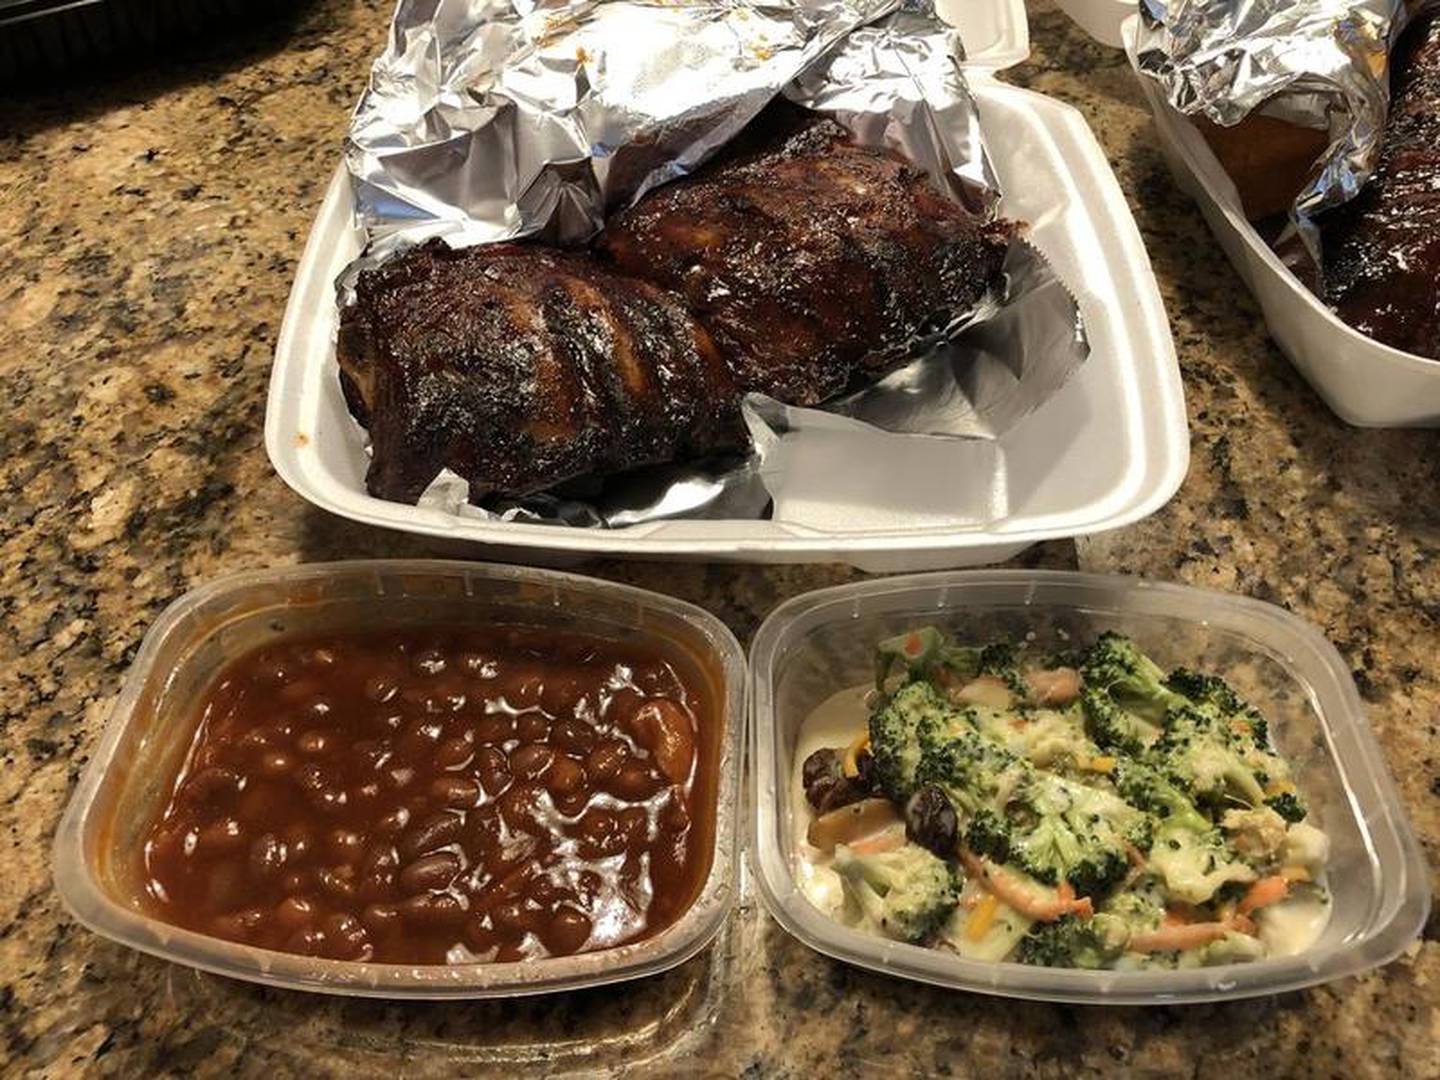 A half slab of Uncle Bub's baby back ribs is accompanied here with baked beans and broccoli salad.